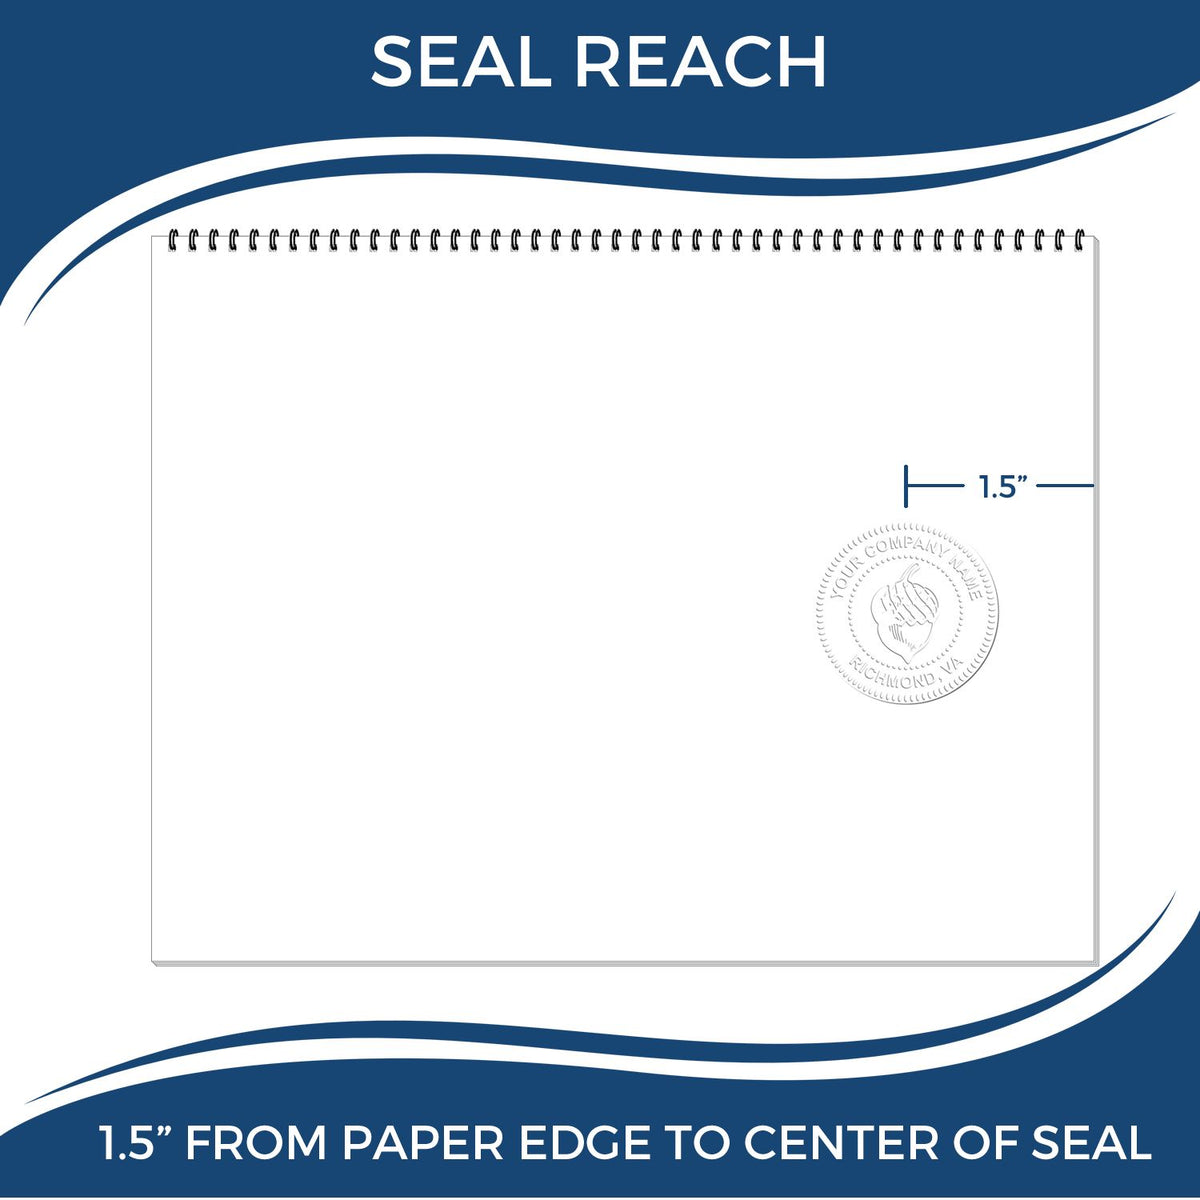 An infographic showing the seal reach which is represented by a ruler and a miniature seal image of the Handheld Idaho Land Surveyor Seal